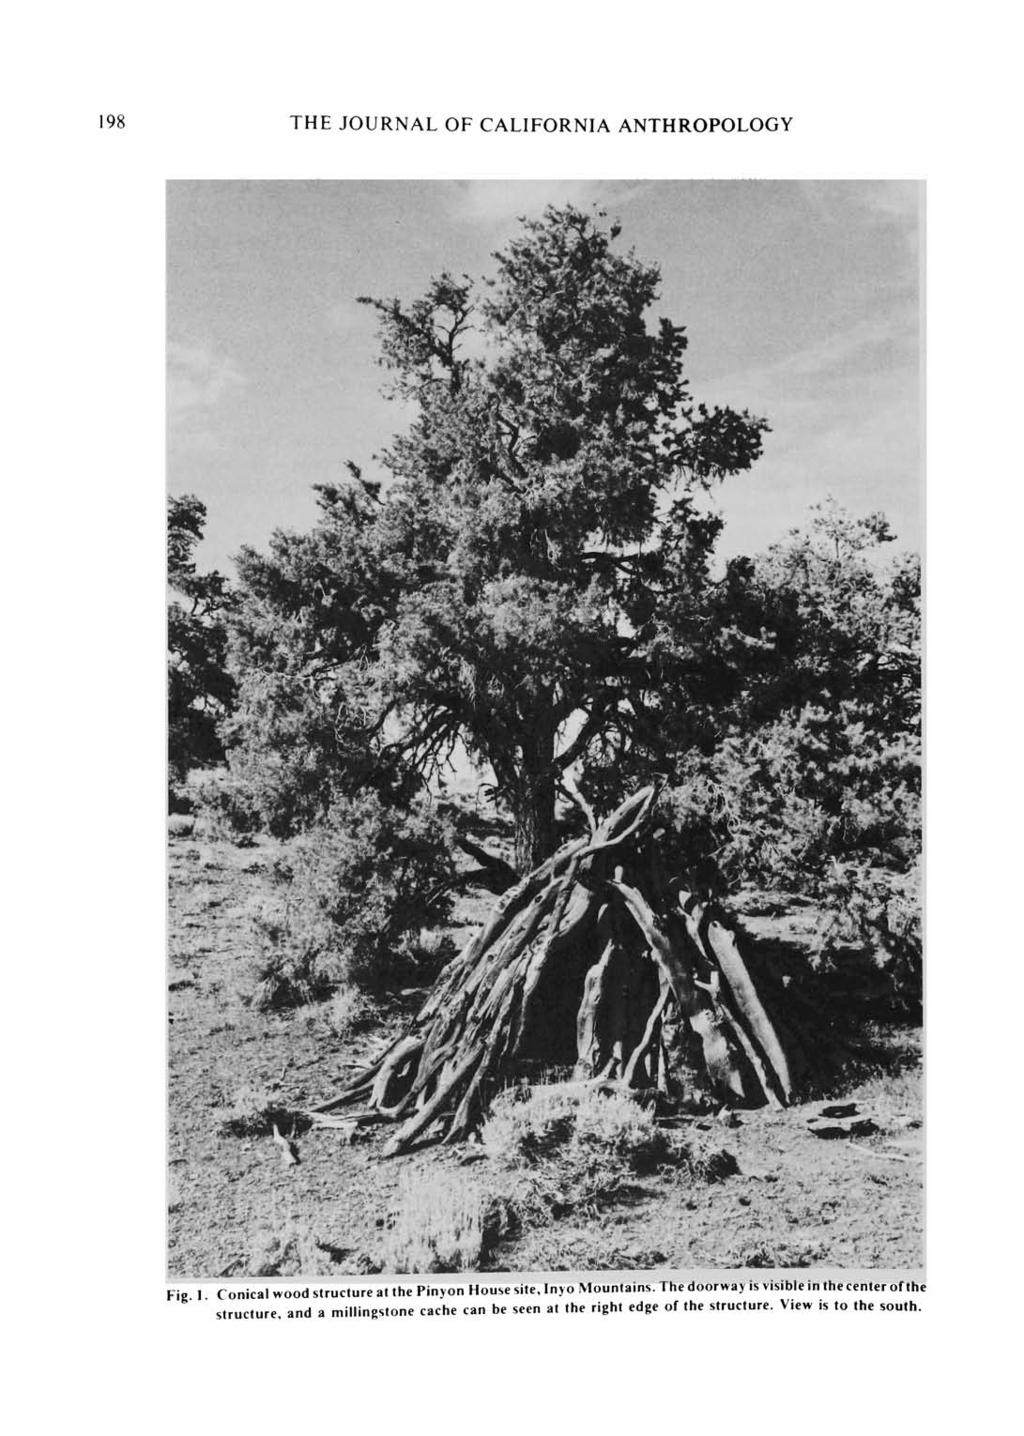 198 THE JOURNAL OF CALIFORNIA ANTHROPOLOGY Fig 1 Conical wood structure al the Pinyon House site, Inyo Mountains.